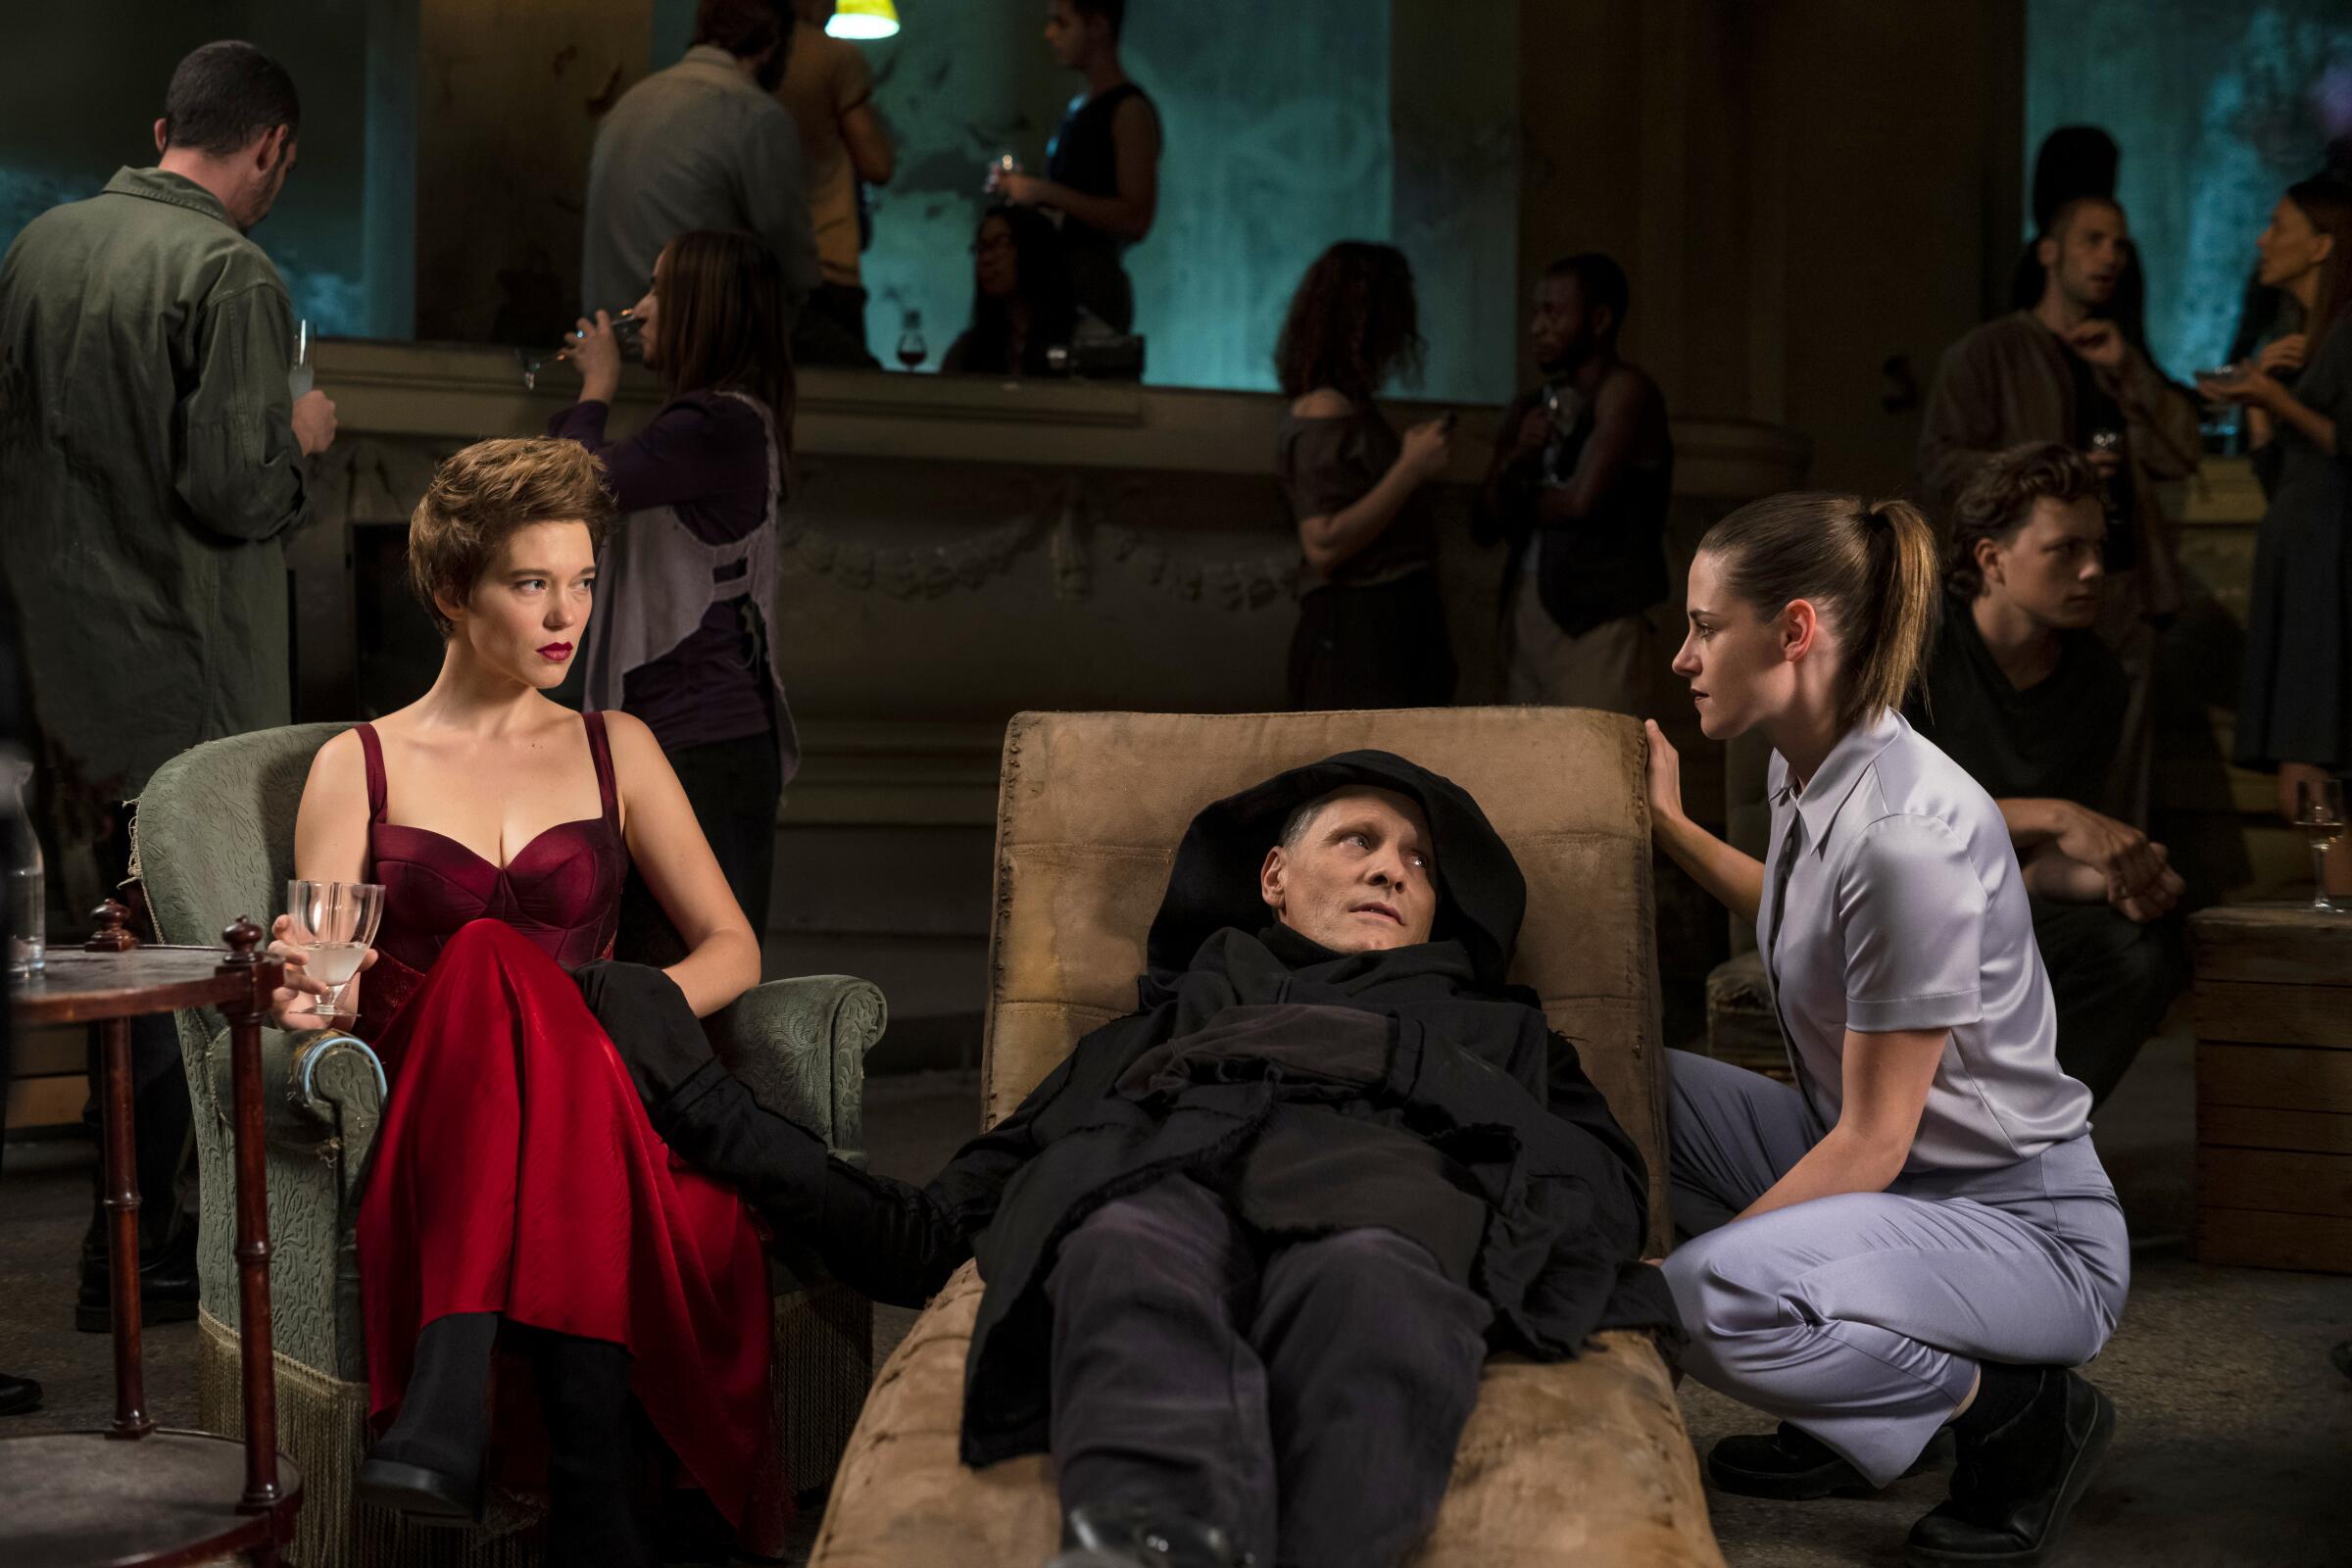 A woman in a red gown sits beside a man in black reclining and another woman crouches beside him in "Crimes of the Future."